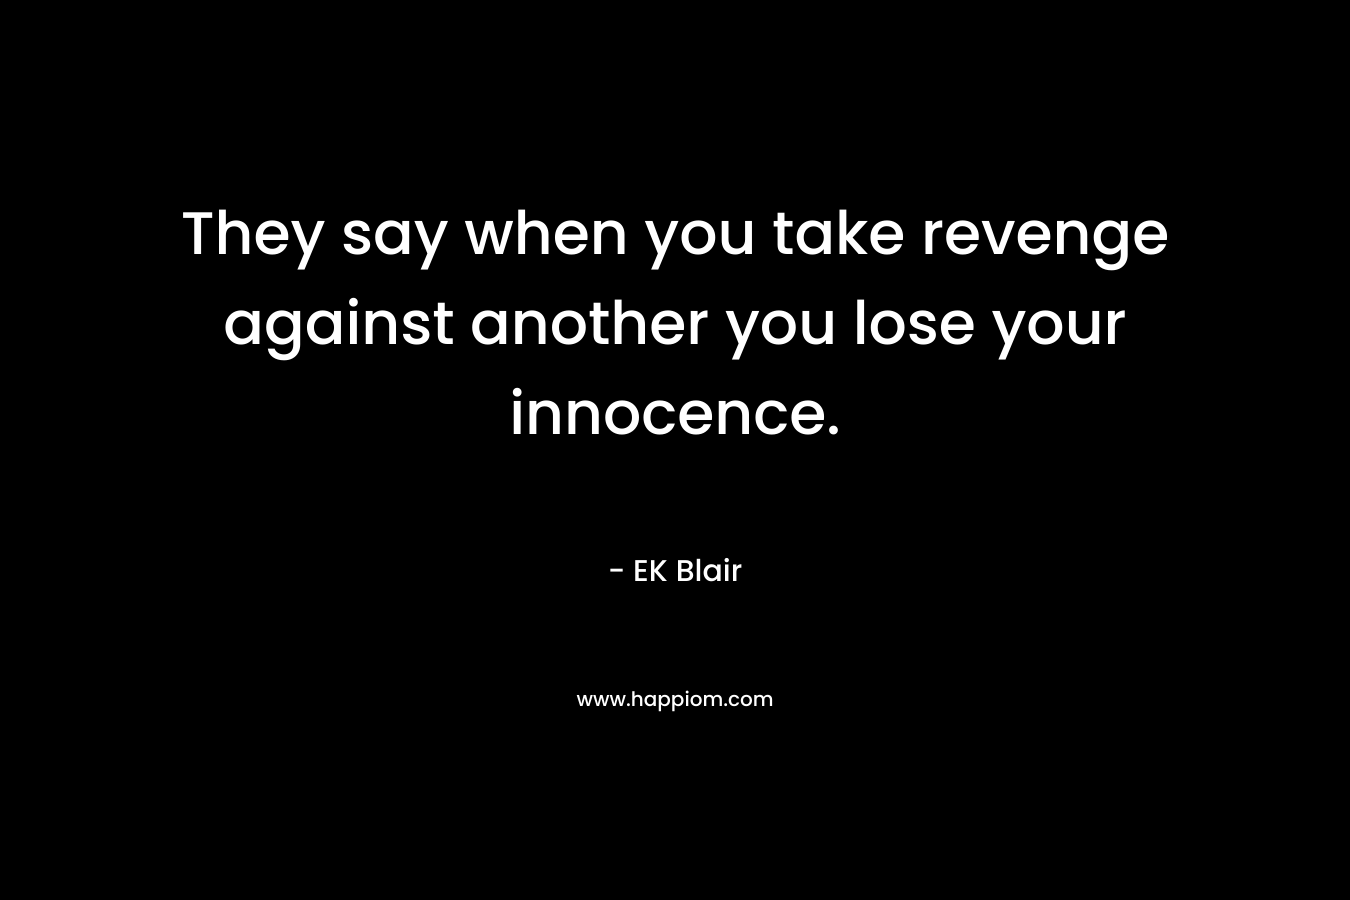 They say when you take revenge against another you lose your innocence.